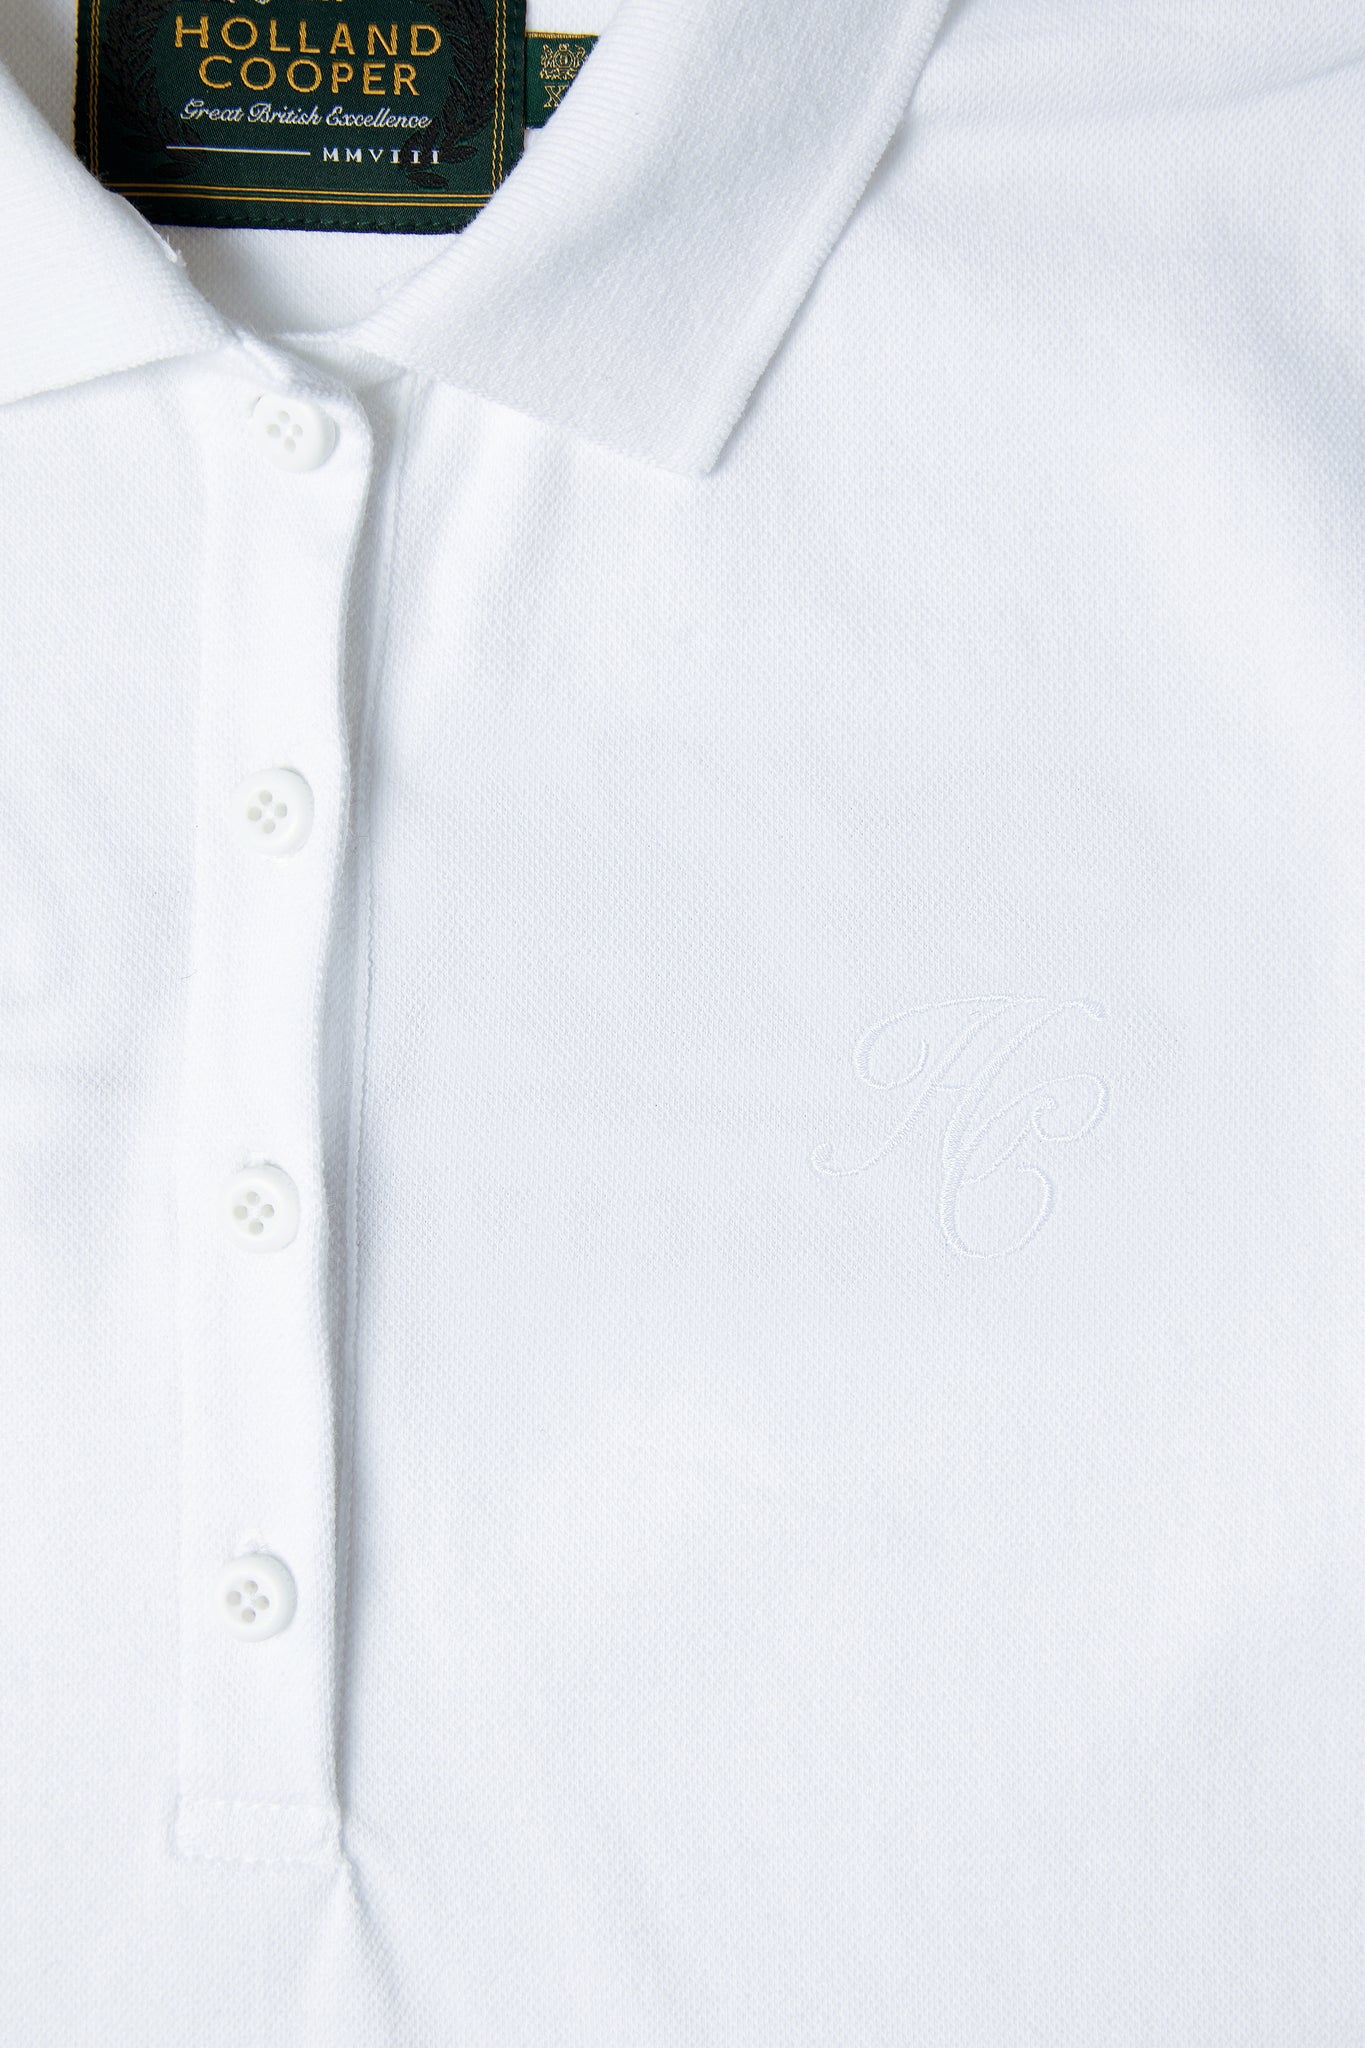 Relaxed Fit Polo Shirt (White)